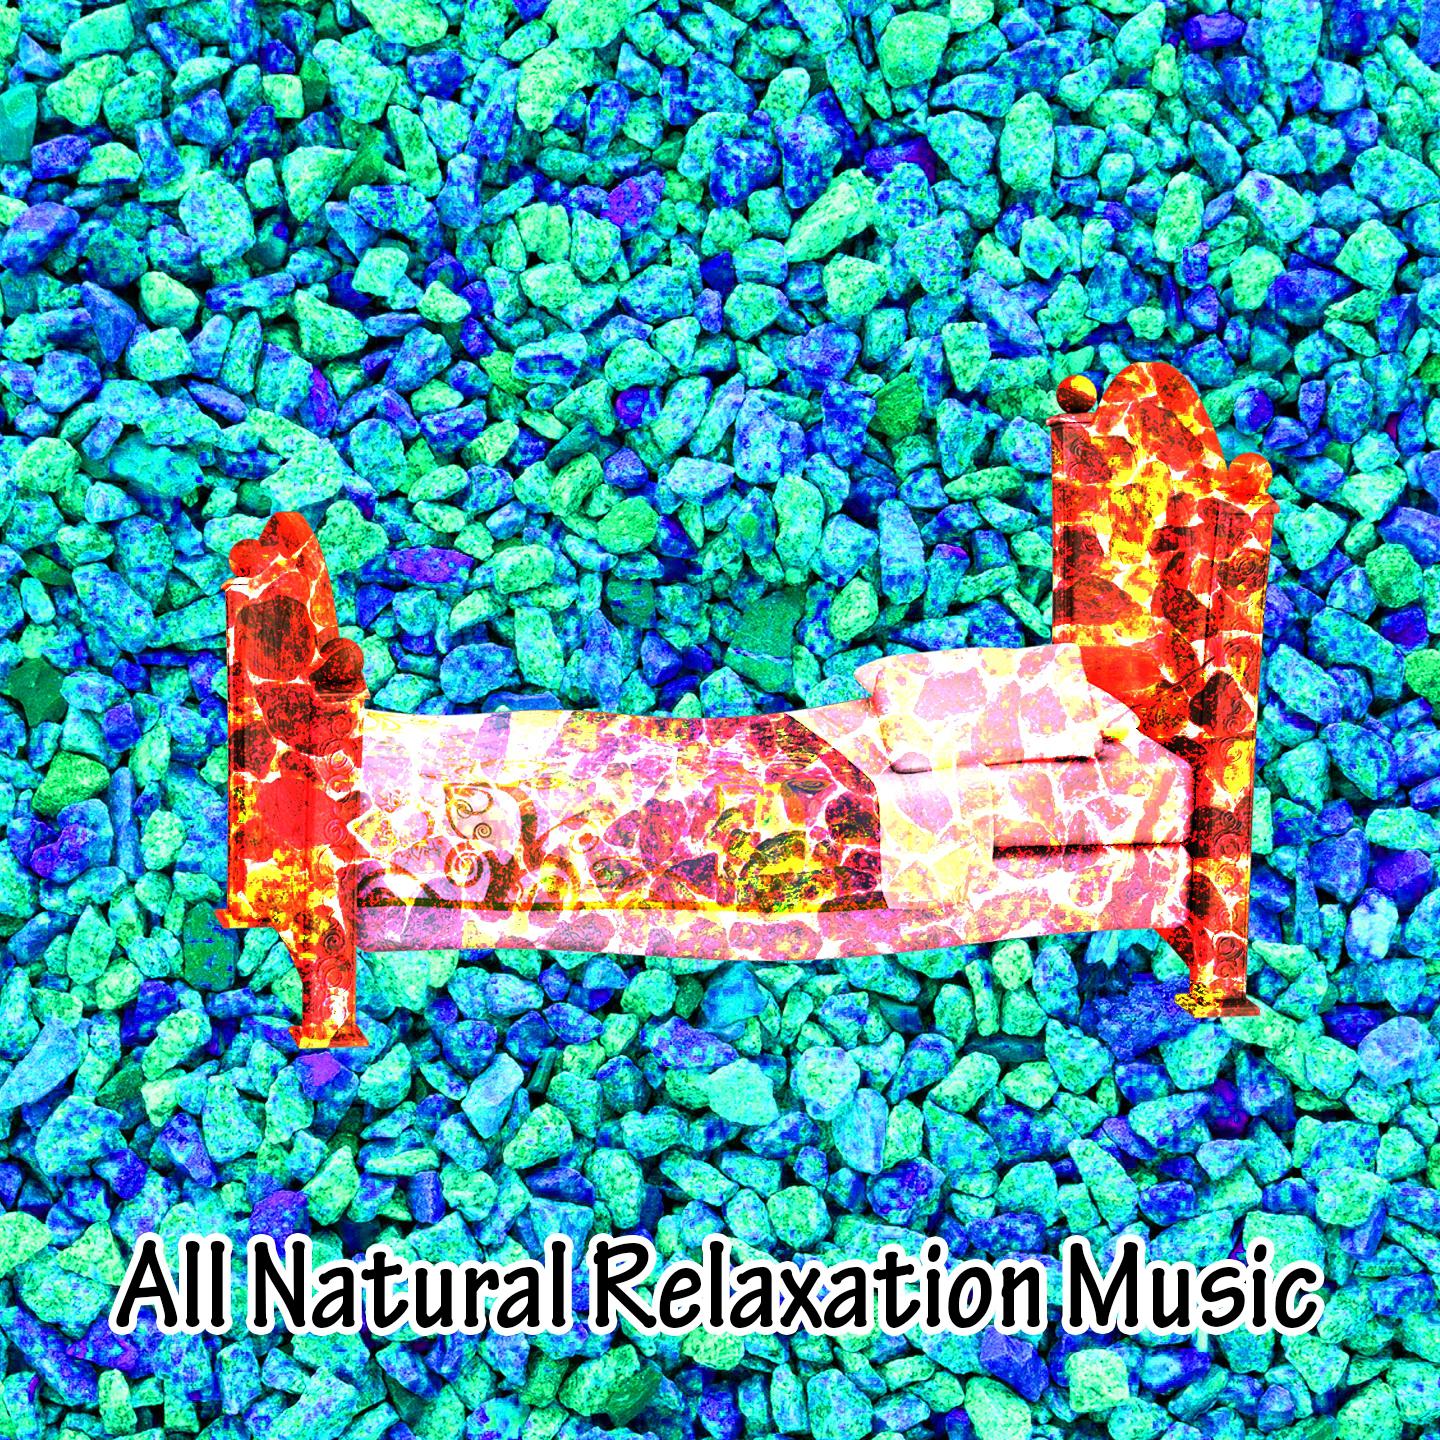 All Natural Relaxation Music